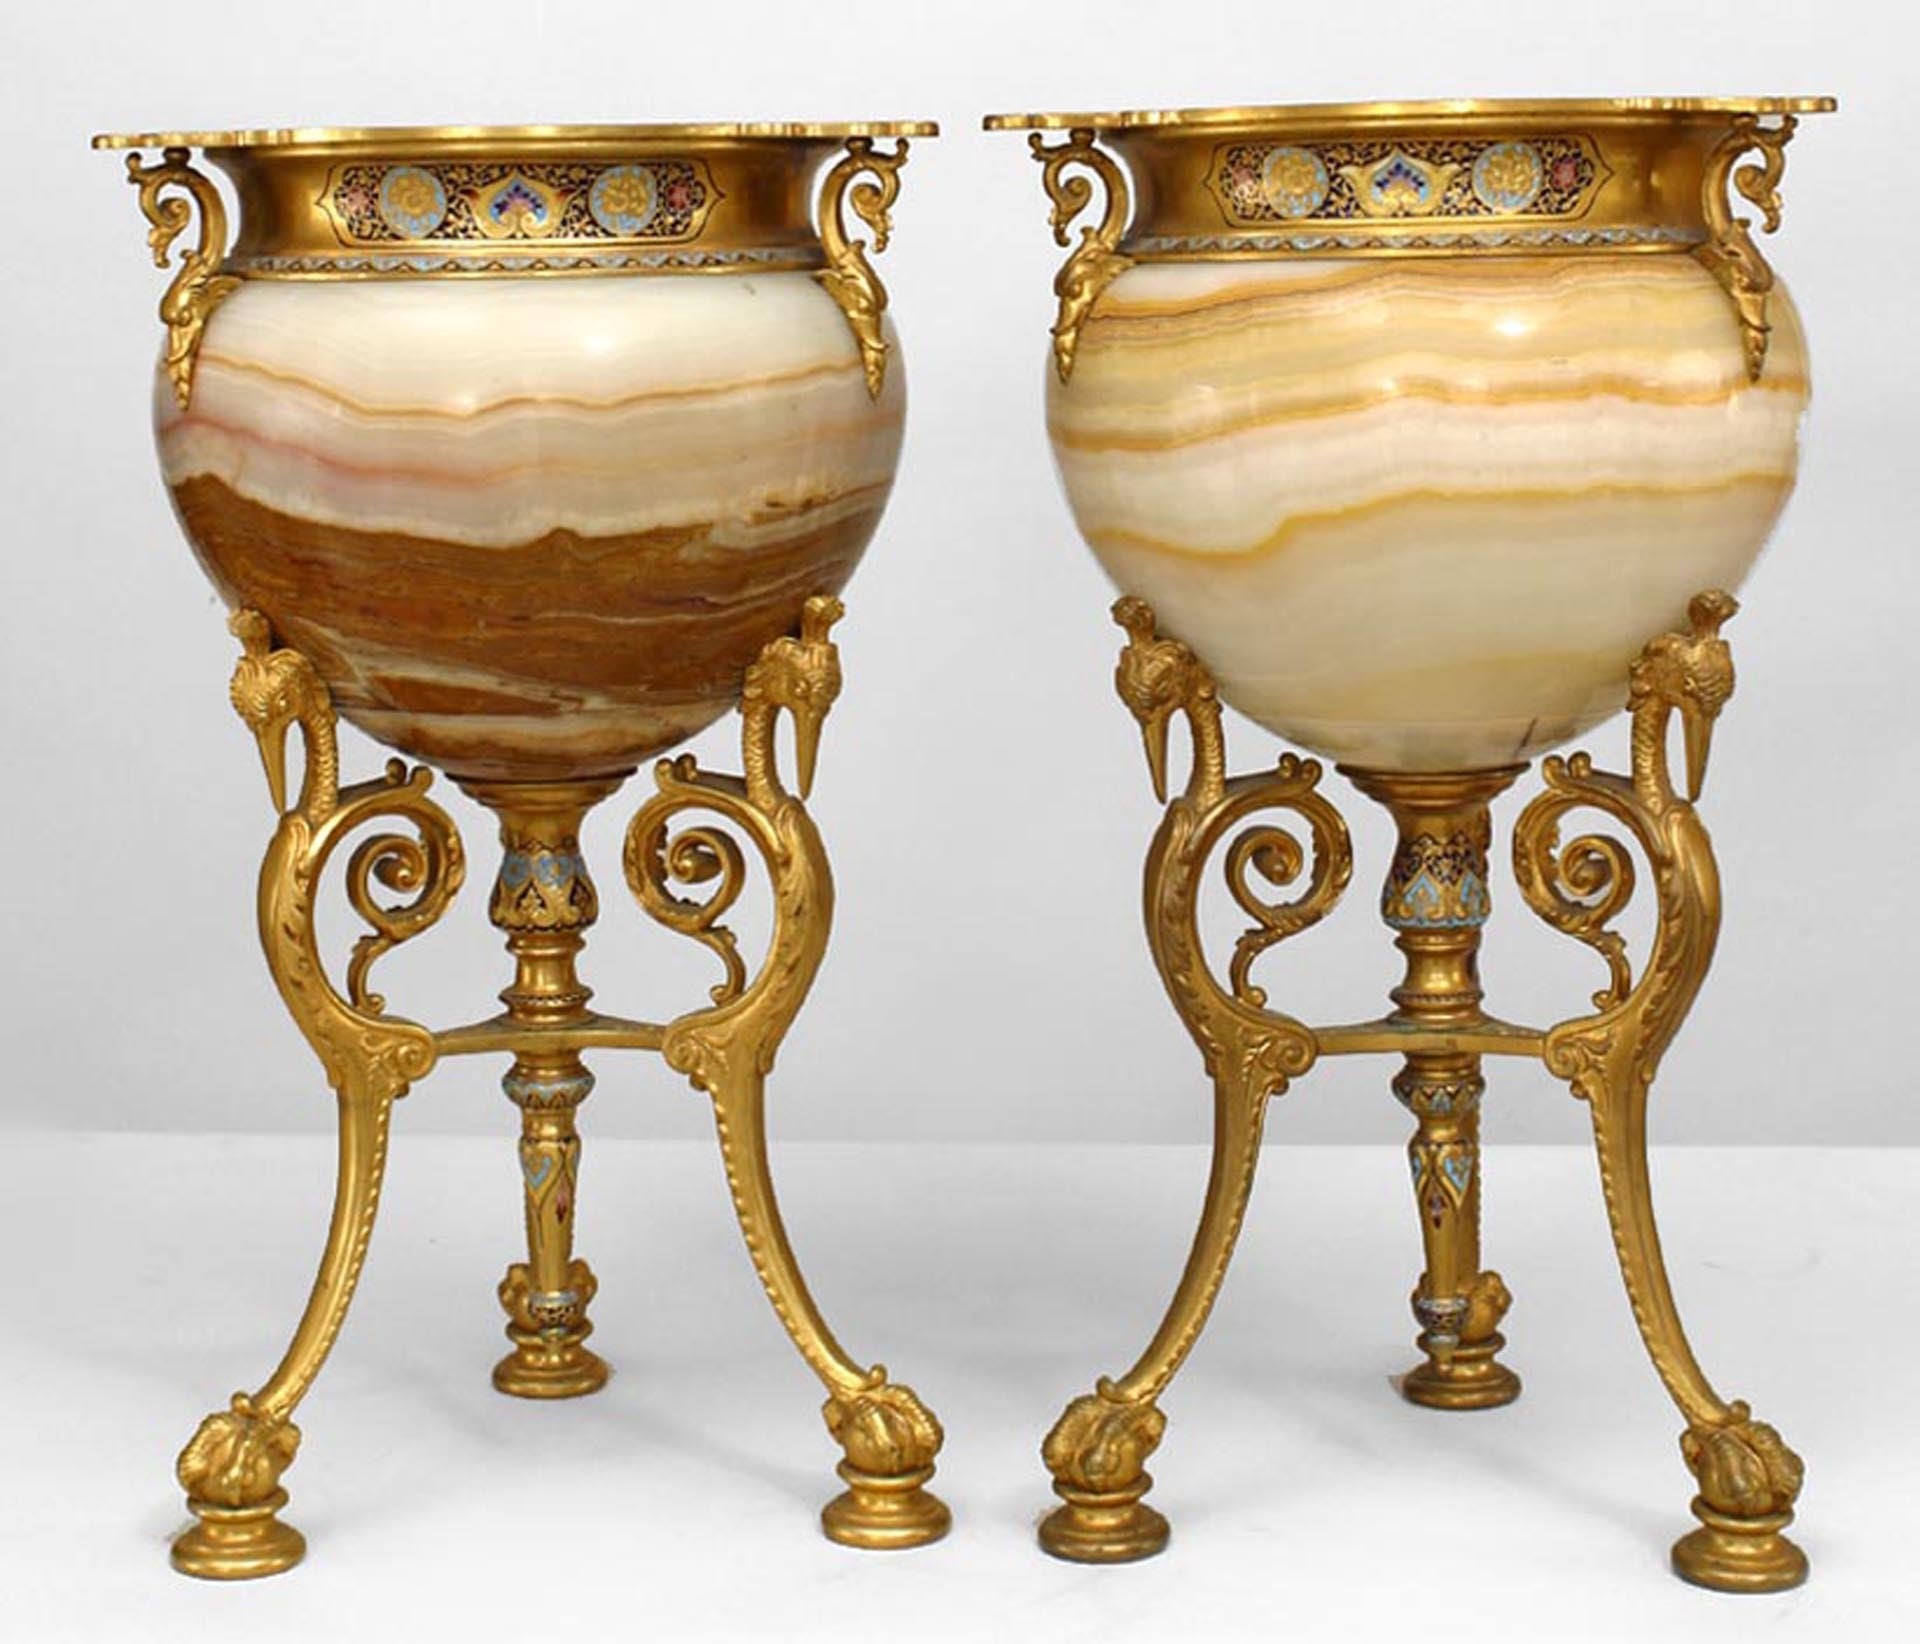 Pair of 19th Century French Onyx and Bronze Dore Mounted Urns For Sale